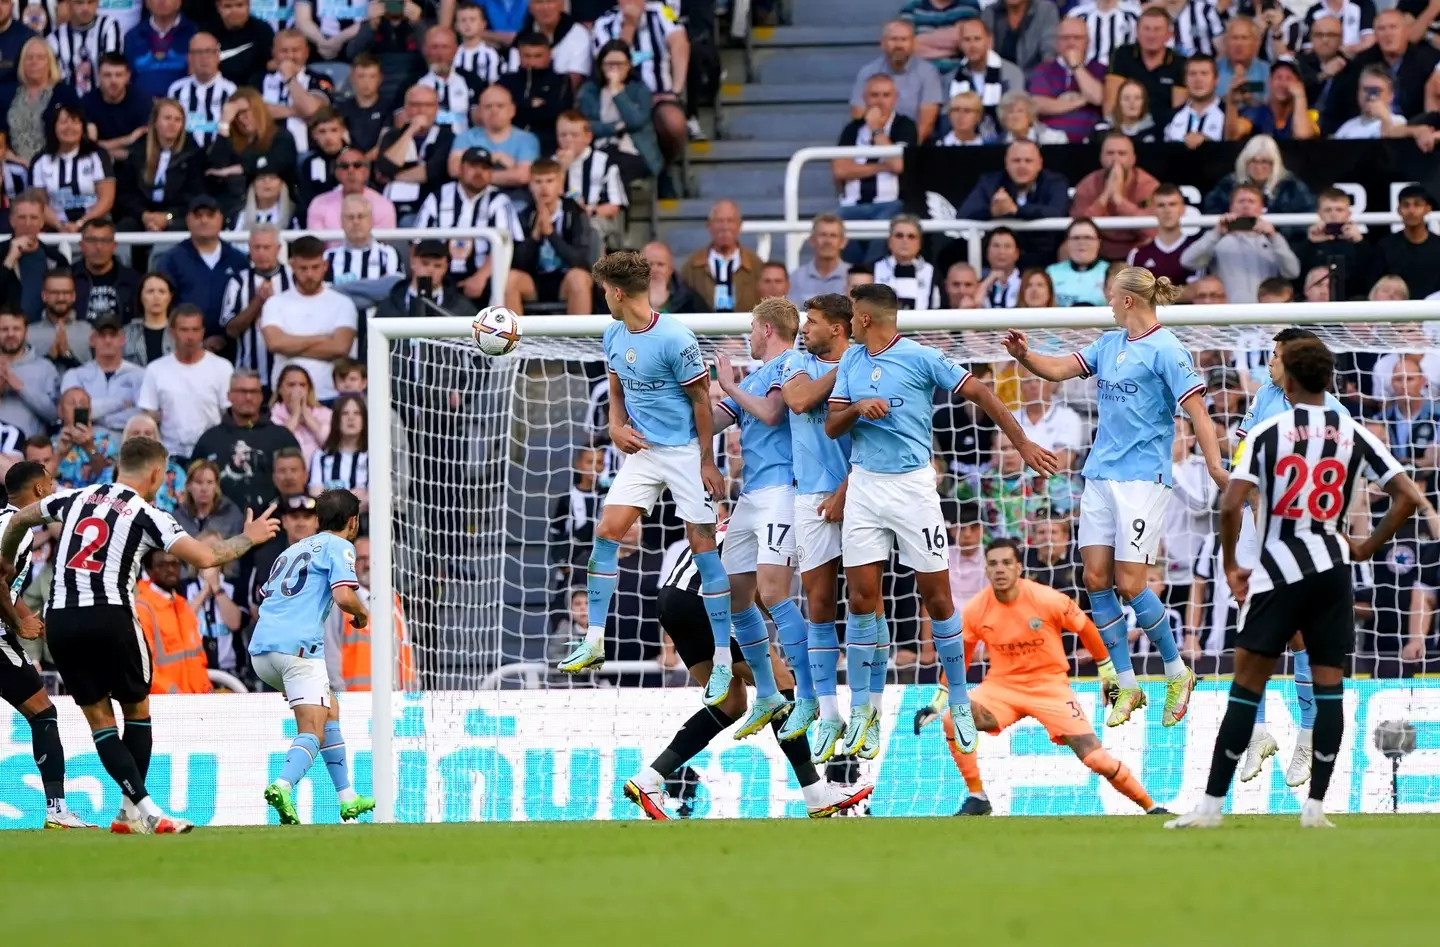 Trippier bends a free-kick over the Manchester City wall to make it 3-1. (Image